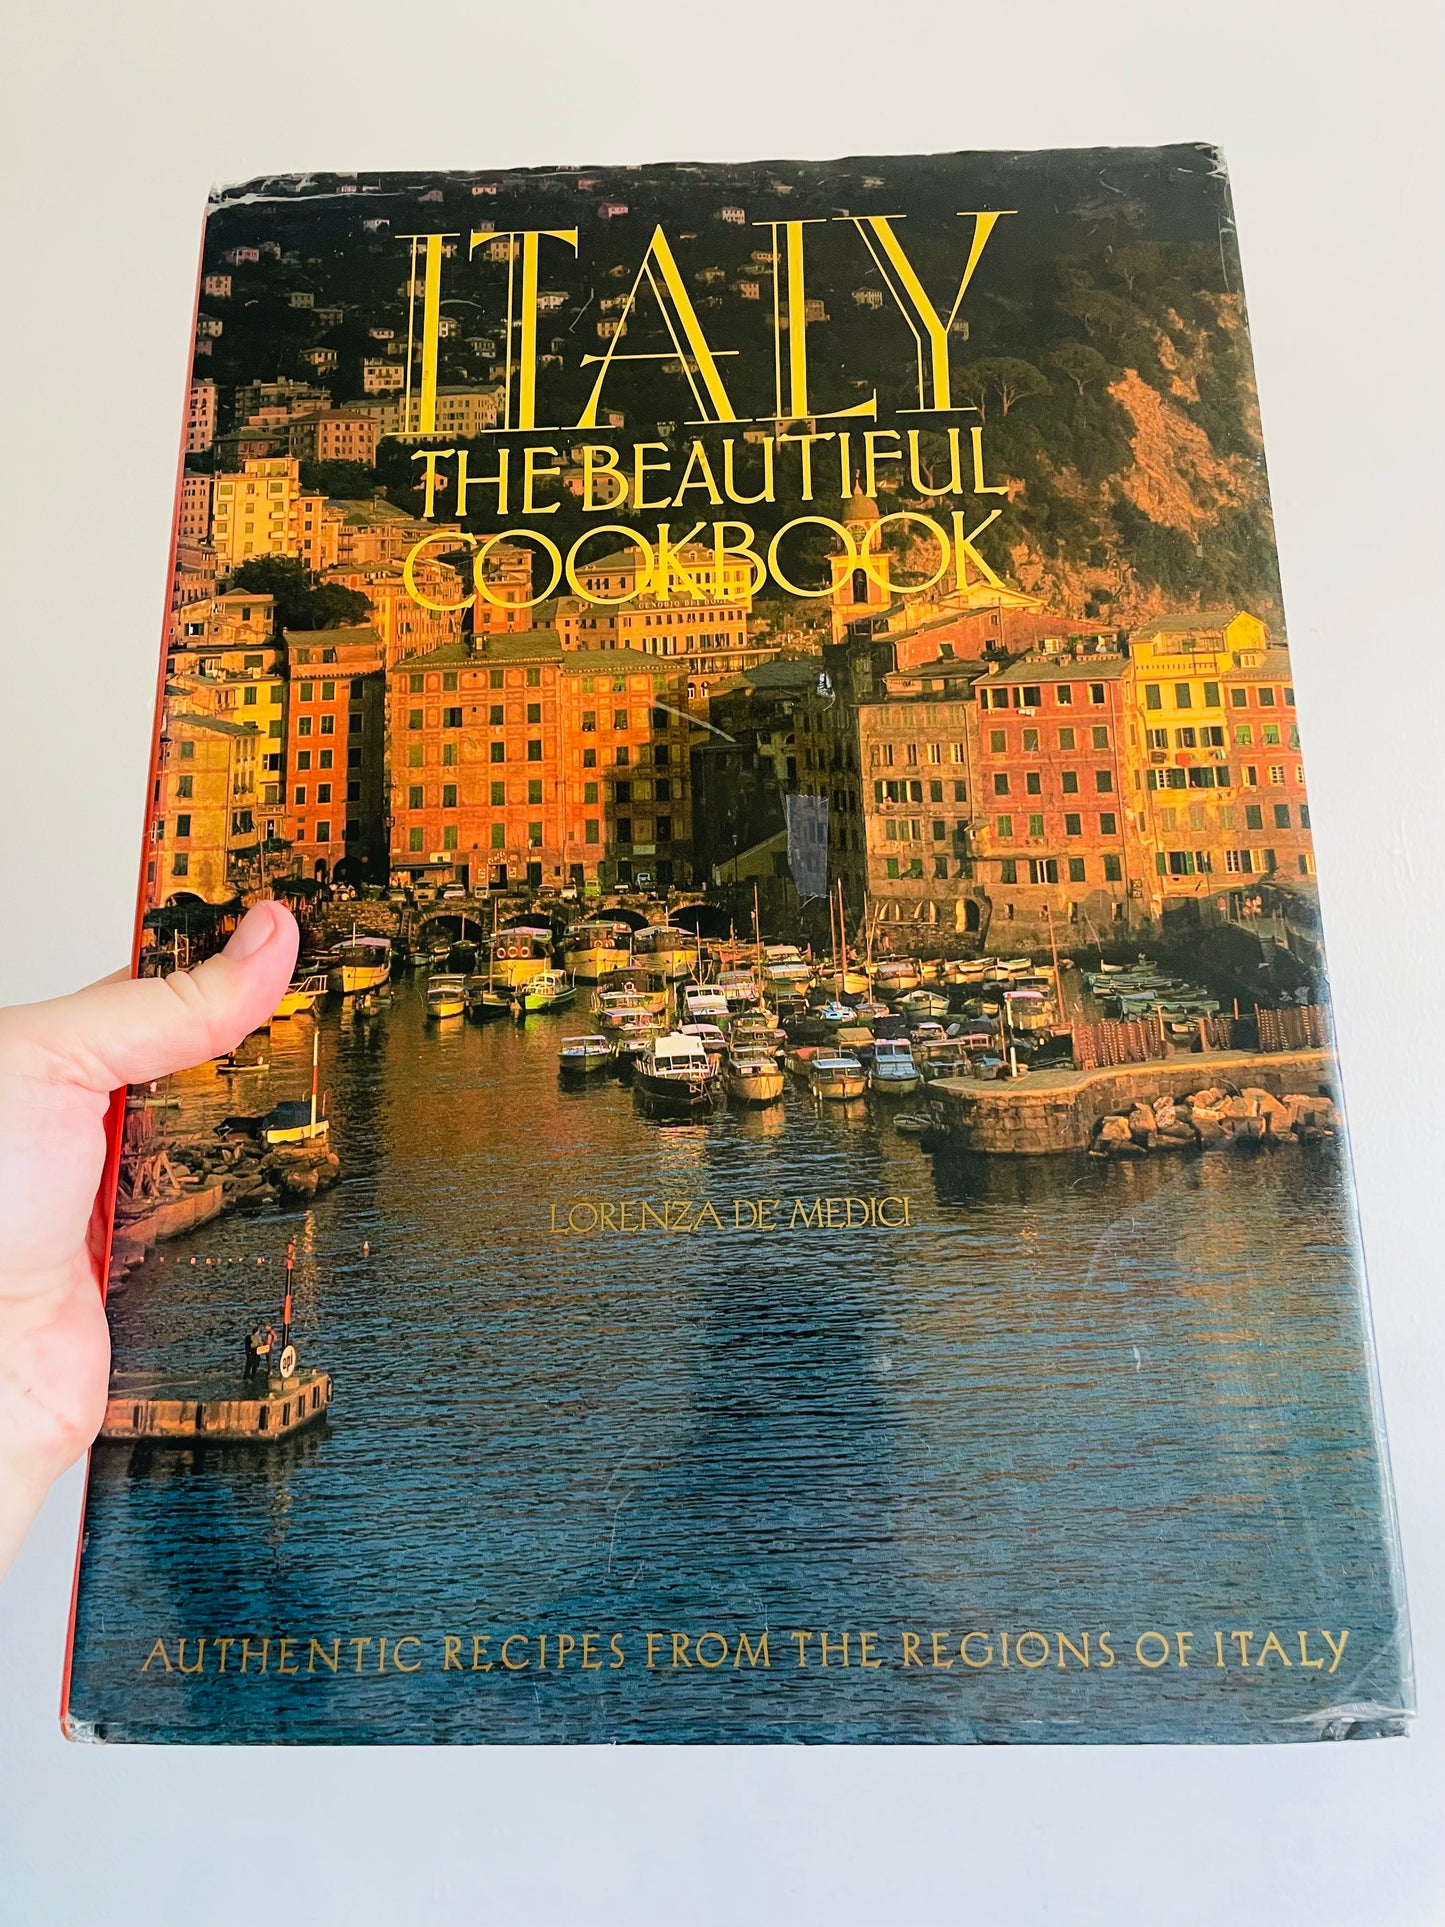 Italy: The Beautiful Cookbook - Giant Hardcover Book with Photos (1996)